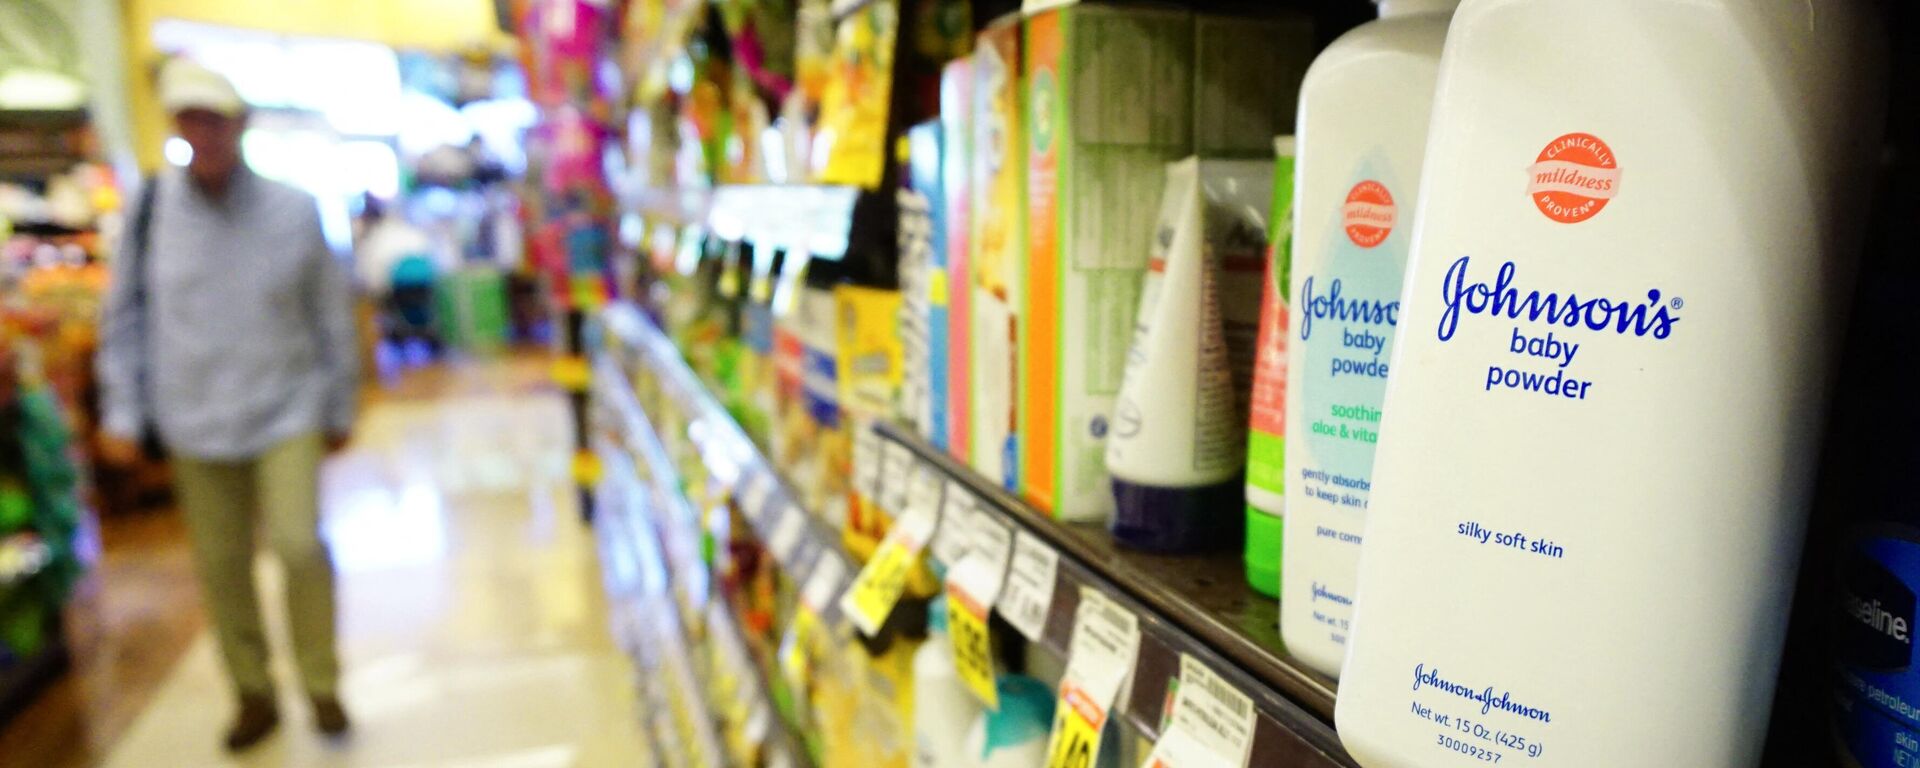 Johnson's baby powder remains stocked at a supermarket shelf on August 22, 2017 in Alhambra, California, where a Los Angeles jury on August 21 ordered Johnson & Johnson to pay a record $417 million to a woman in hospital who sued the company - Sputnik Africa, 1920, 19.06.2023